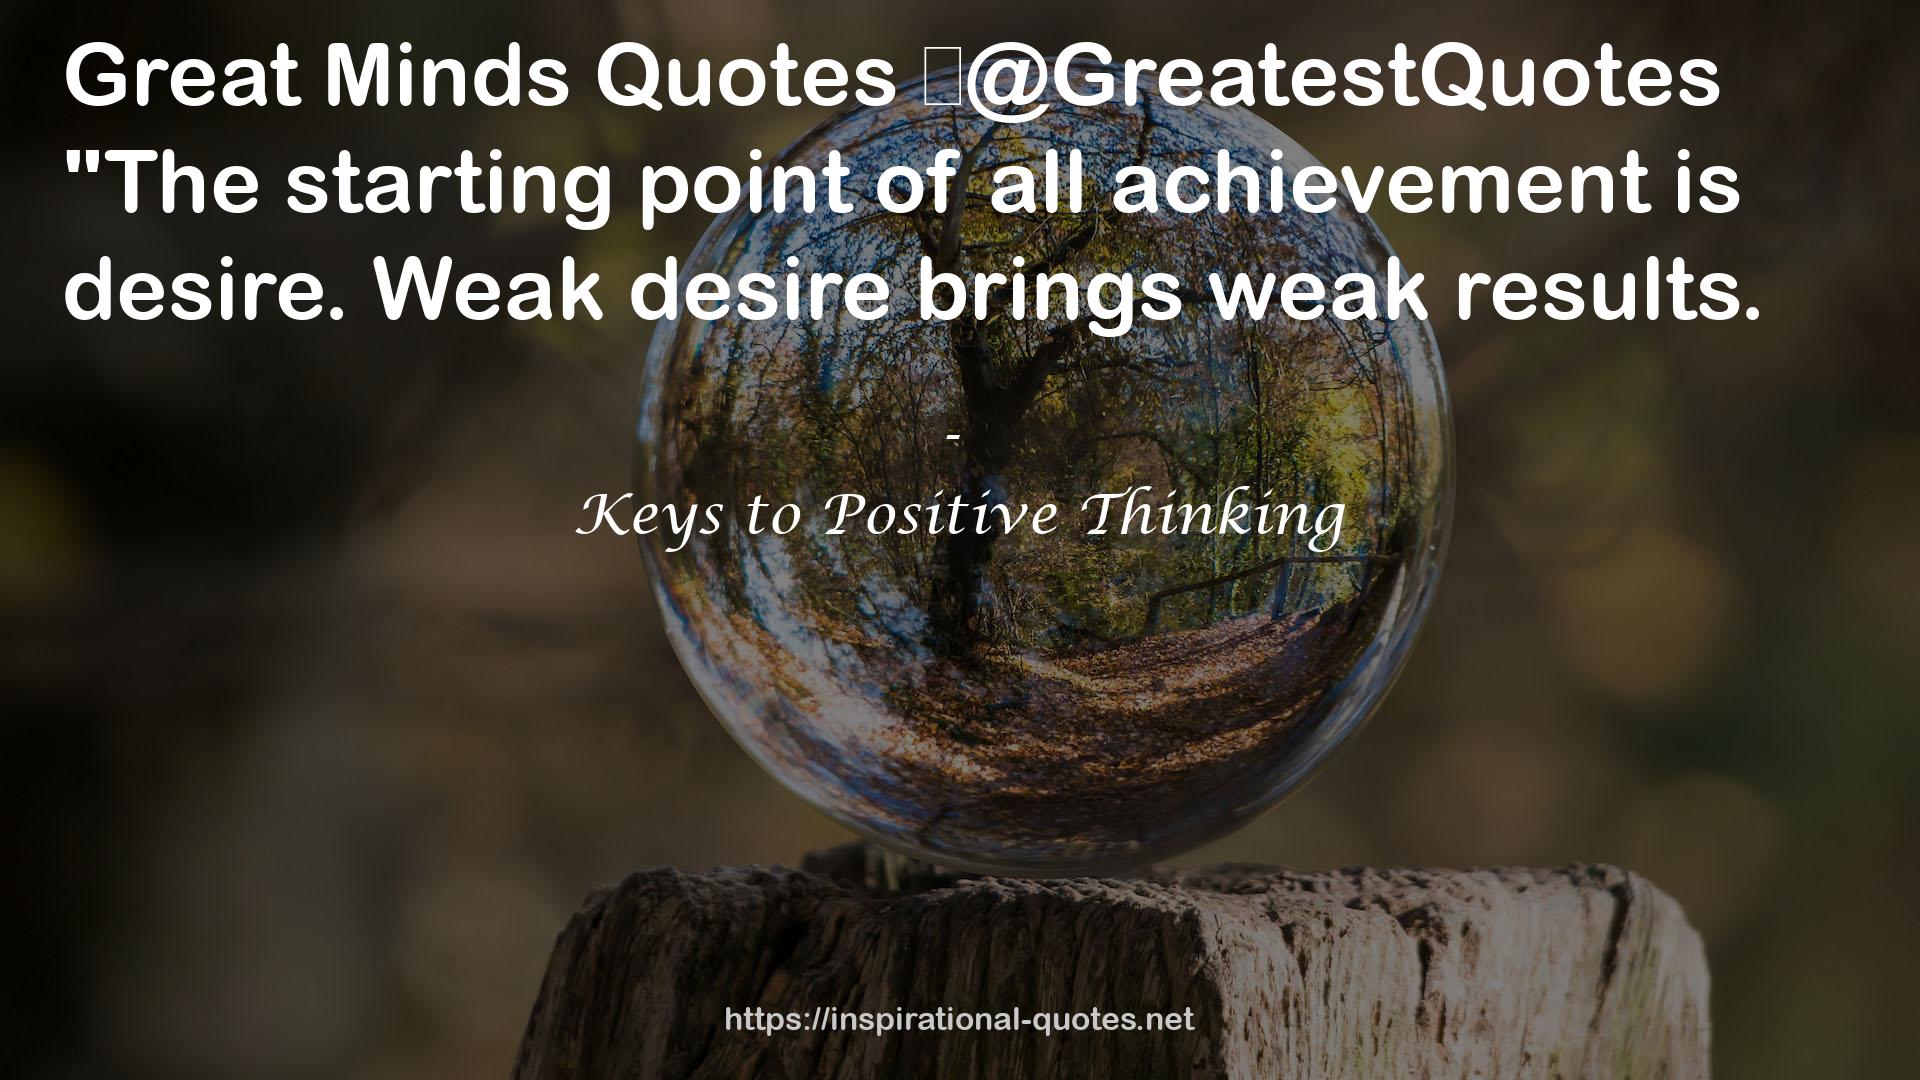 Keys to Positive Thinking QUOTES